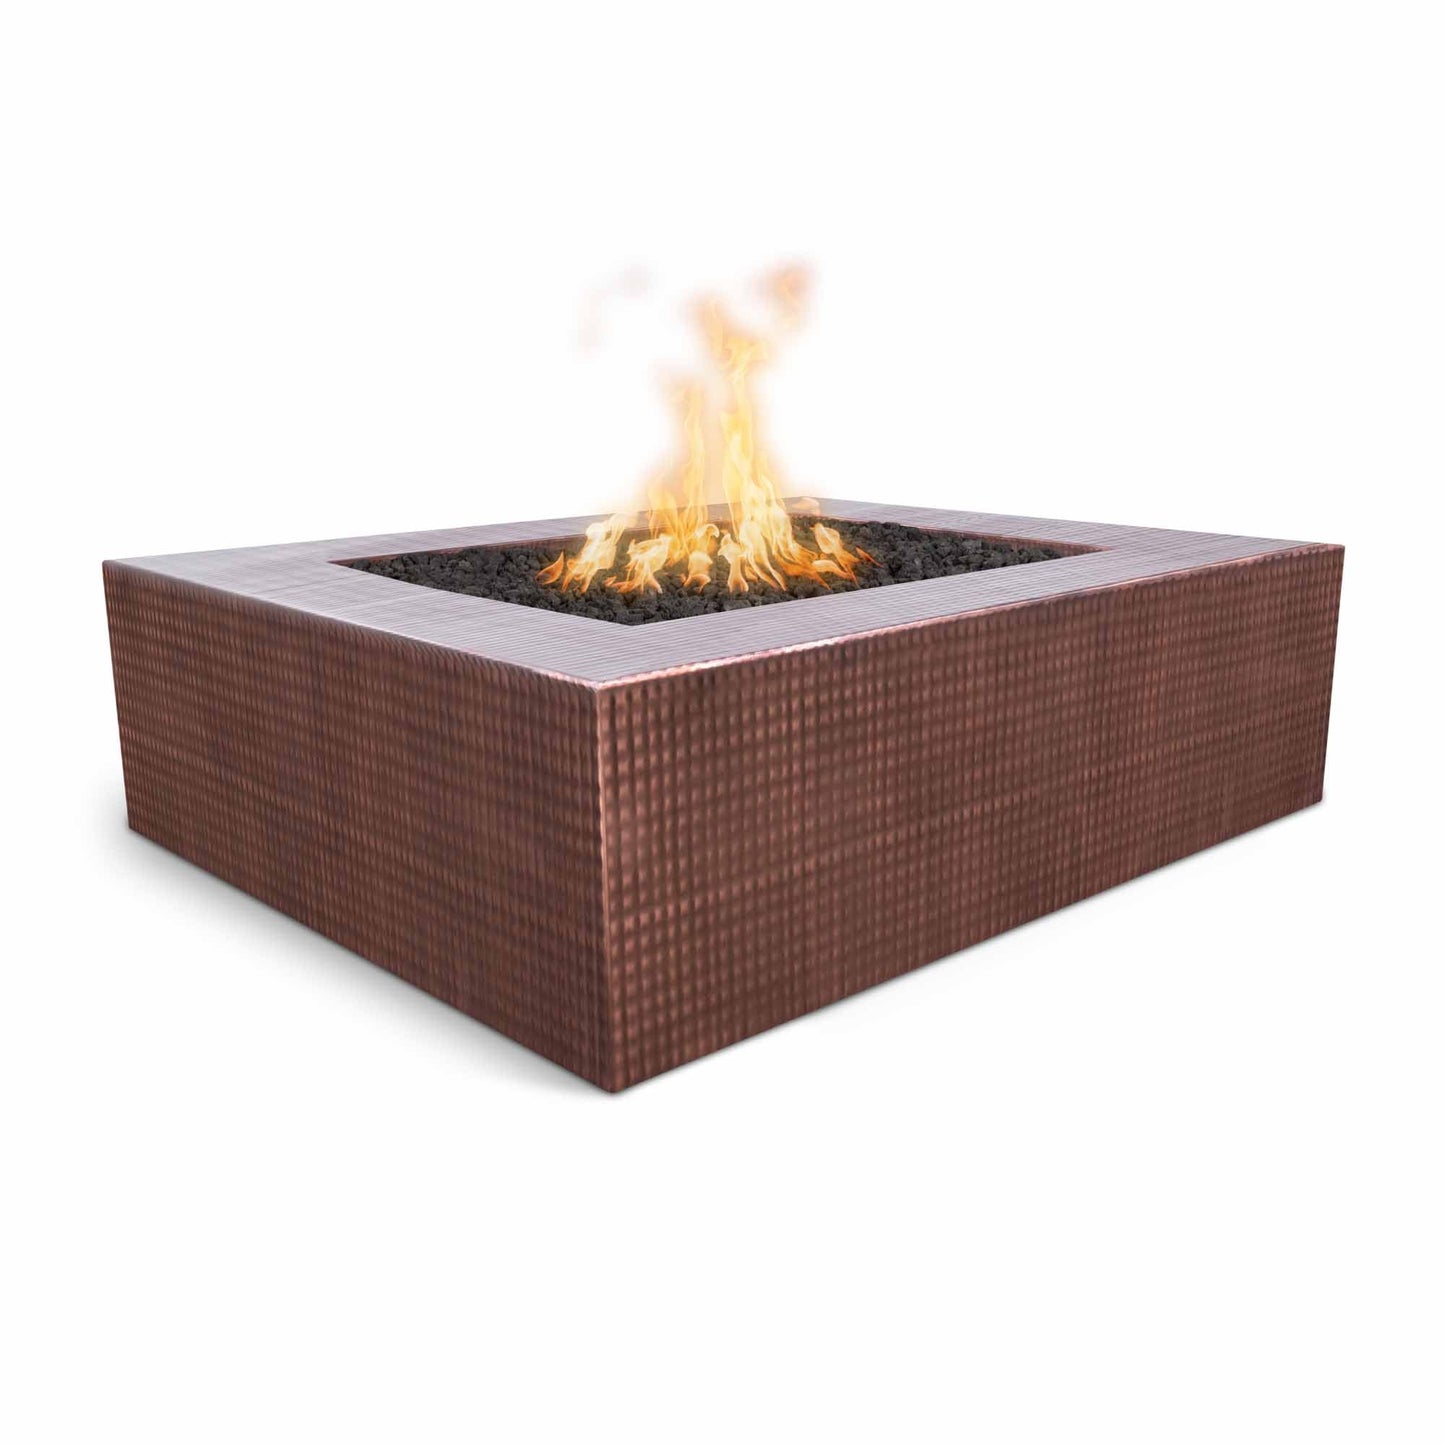 The Outdoor Plus Square Quad 42" Hammered Copper Natural Gas Fire Pit with 12V Electronic Ignition